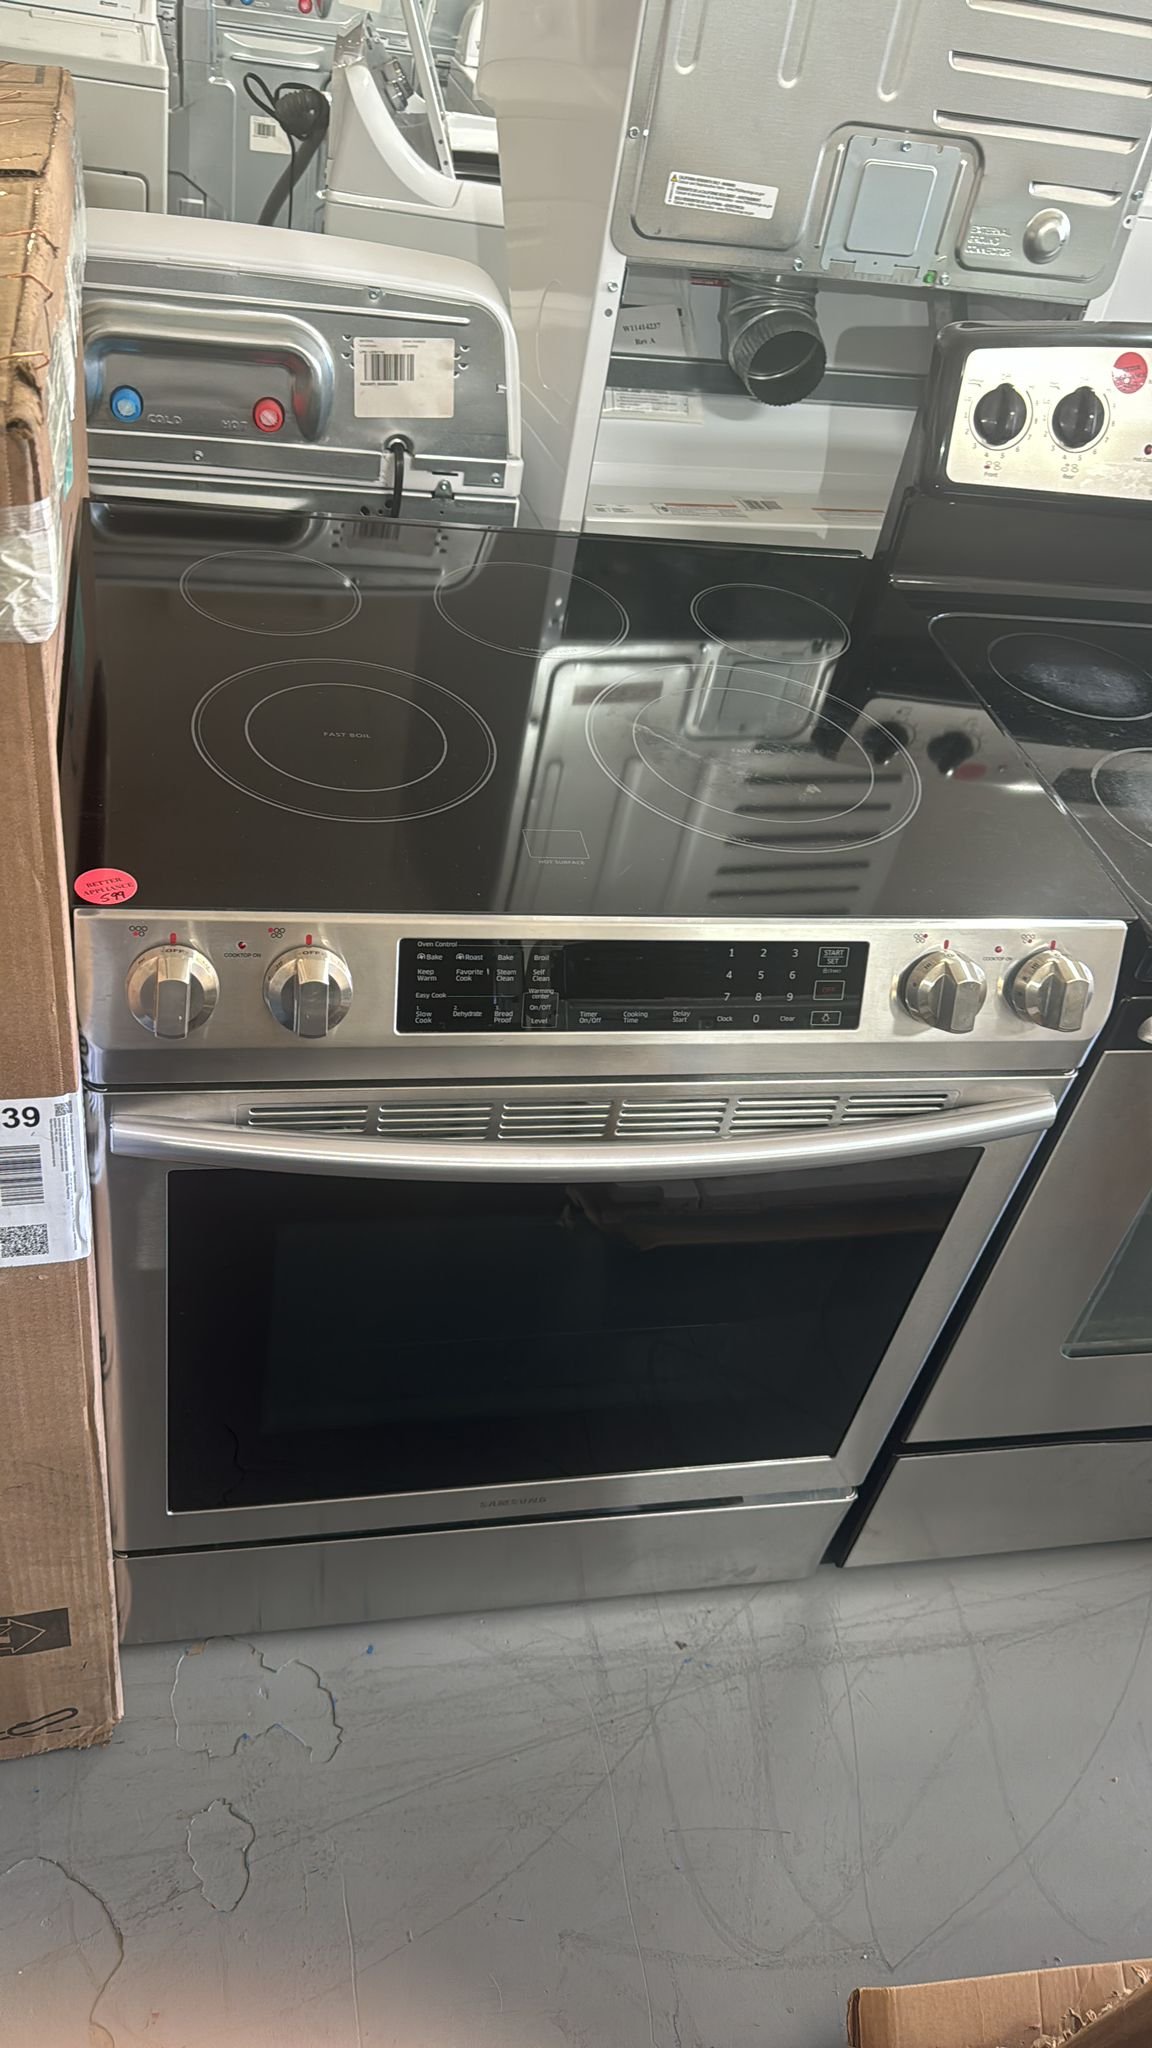 Samsung Used Electric Range Slide In – Stainless